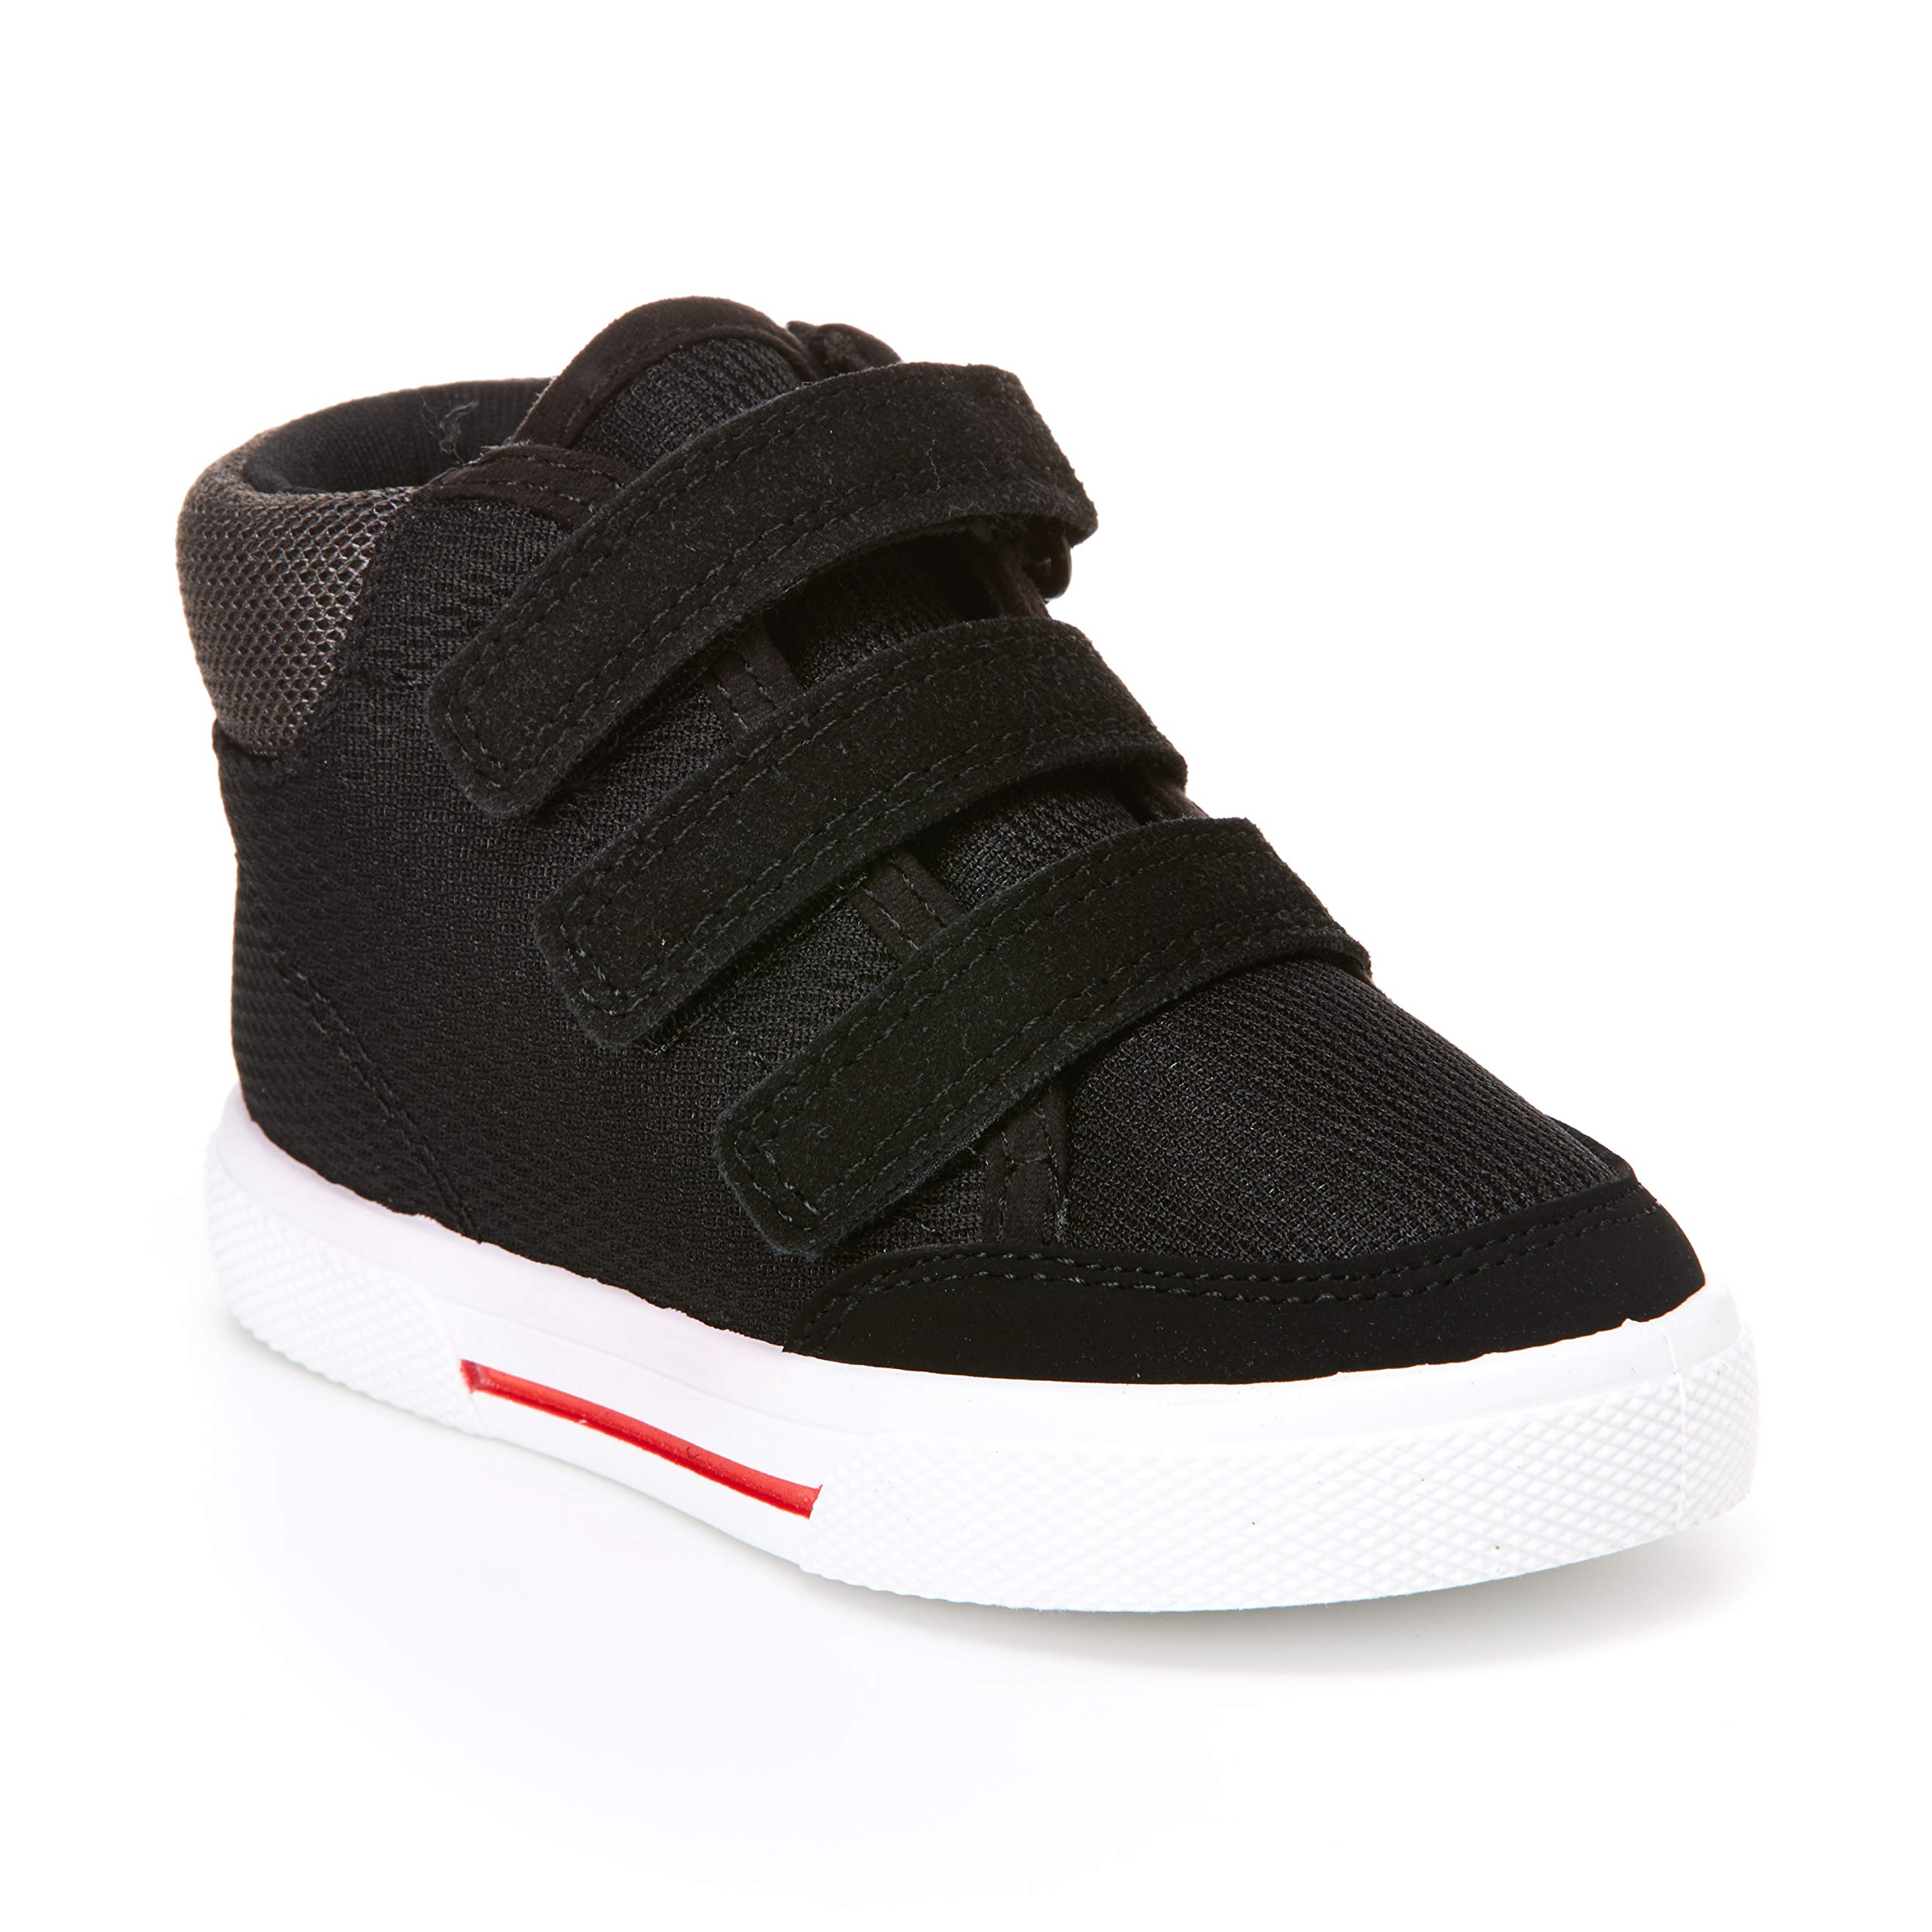 Simple Joys by Carter's Unisex Kids and Toddlers' Daniel High-Top Sneaker